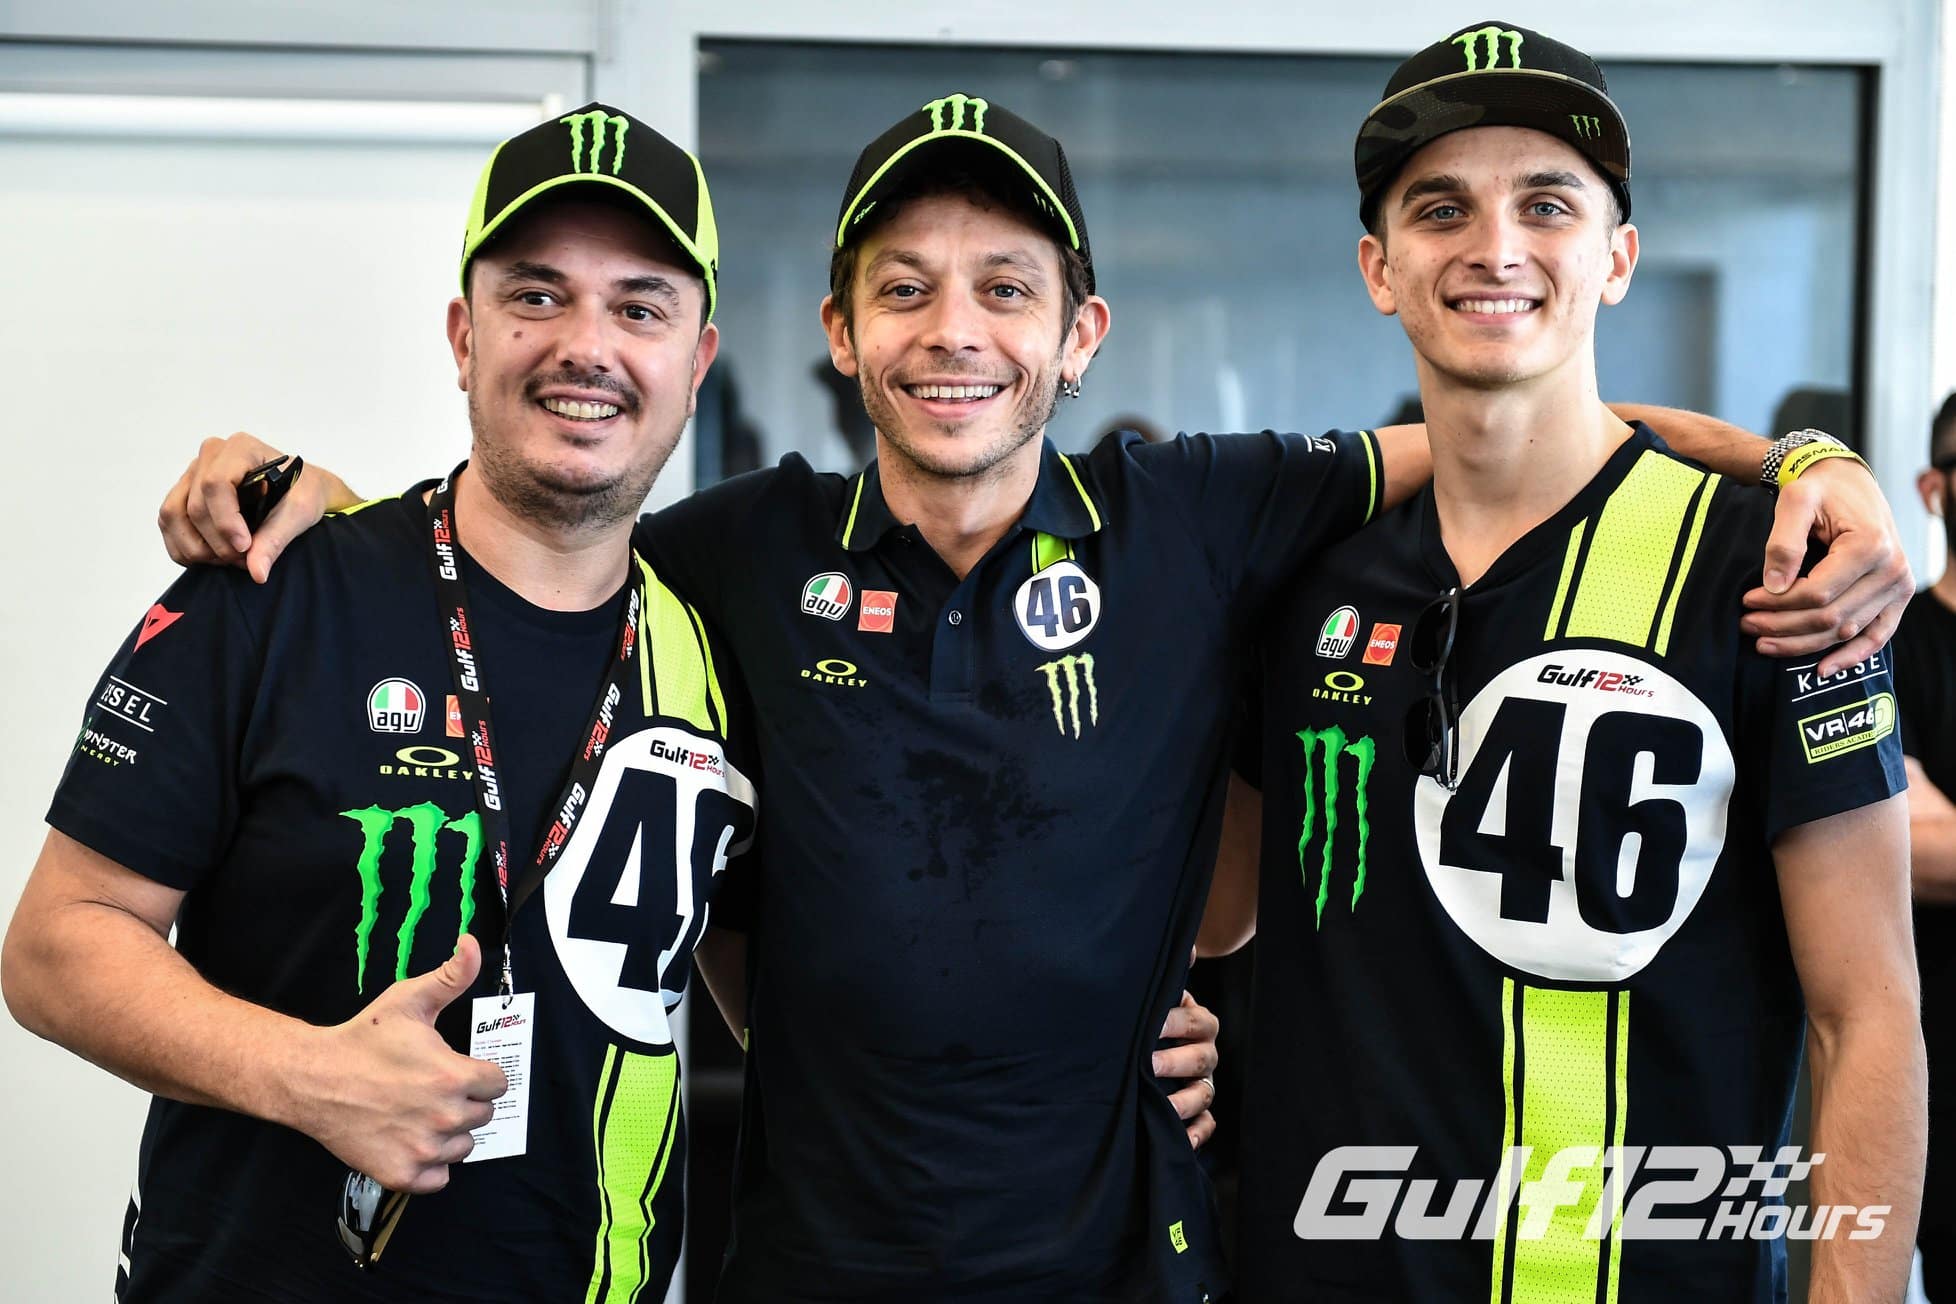 MotoGP Valentino Rossi: “My future is in Endurance with cars”